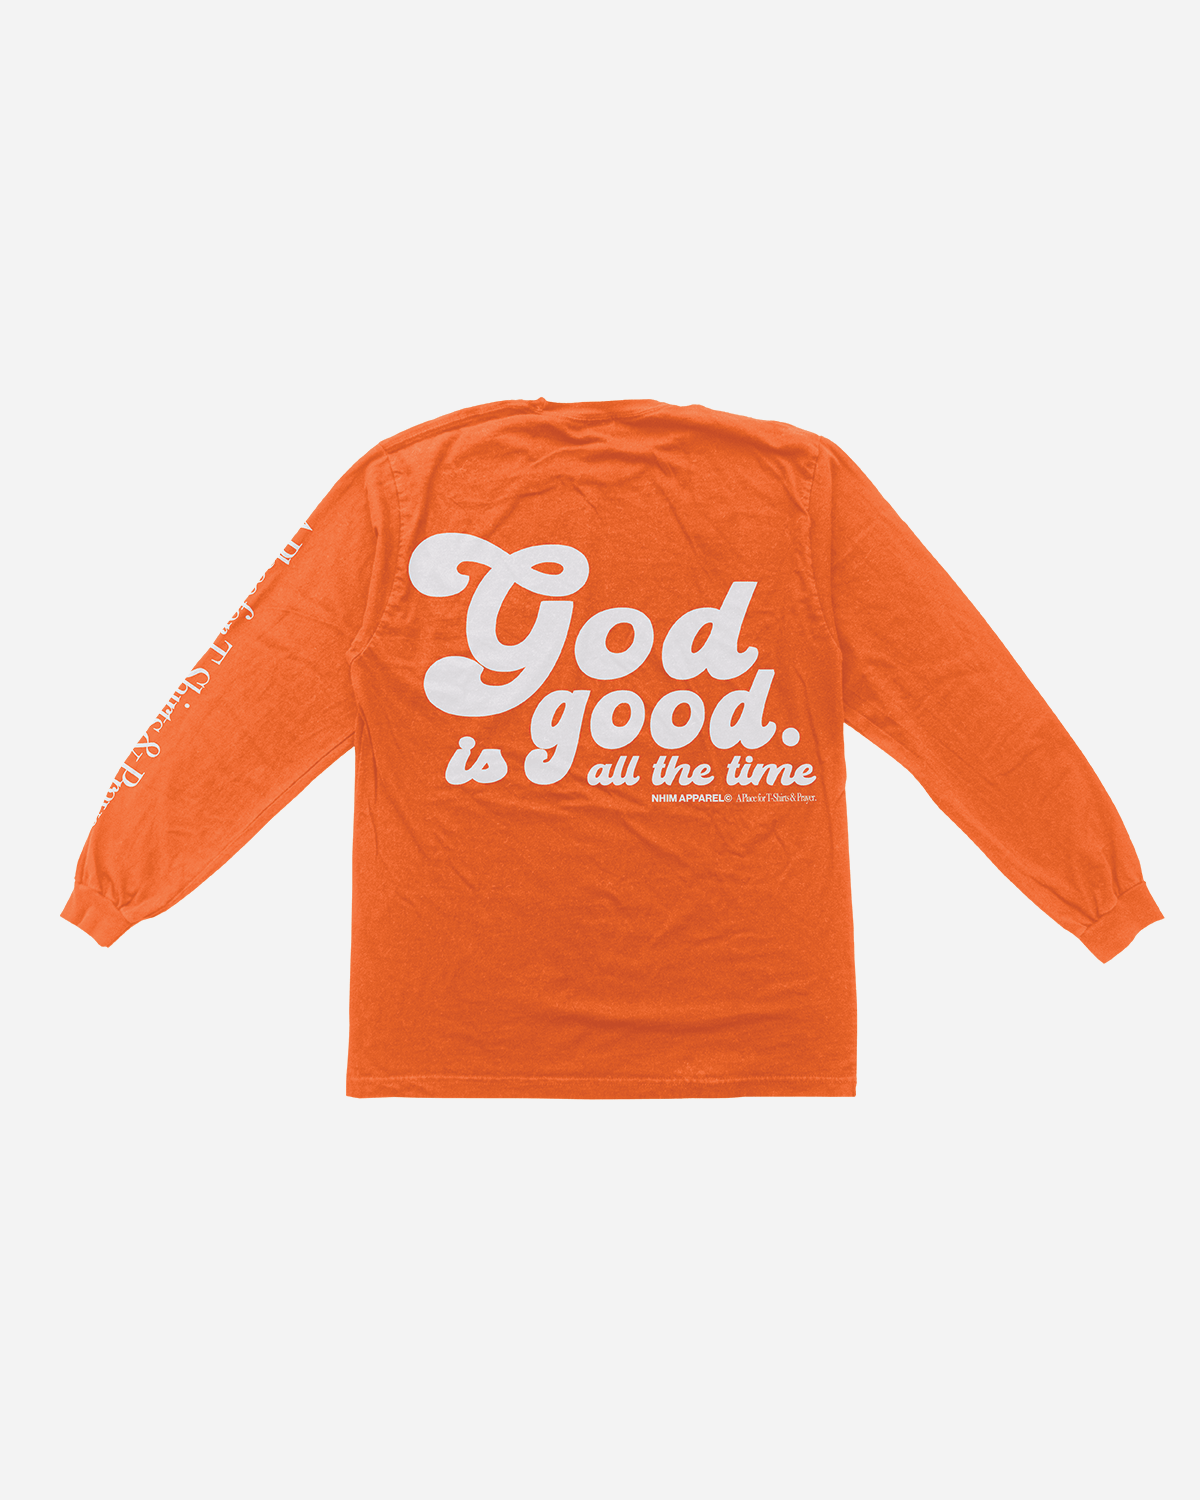 God is Good! God is good all the time Christian long-sleeve orange shirt. puff print. Nhim Apparel Christian clothing company, a place for t-shirts and prayer.